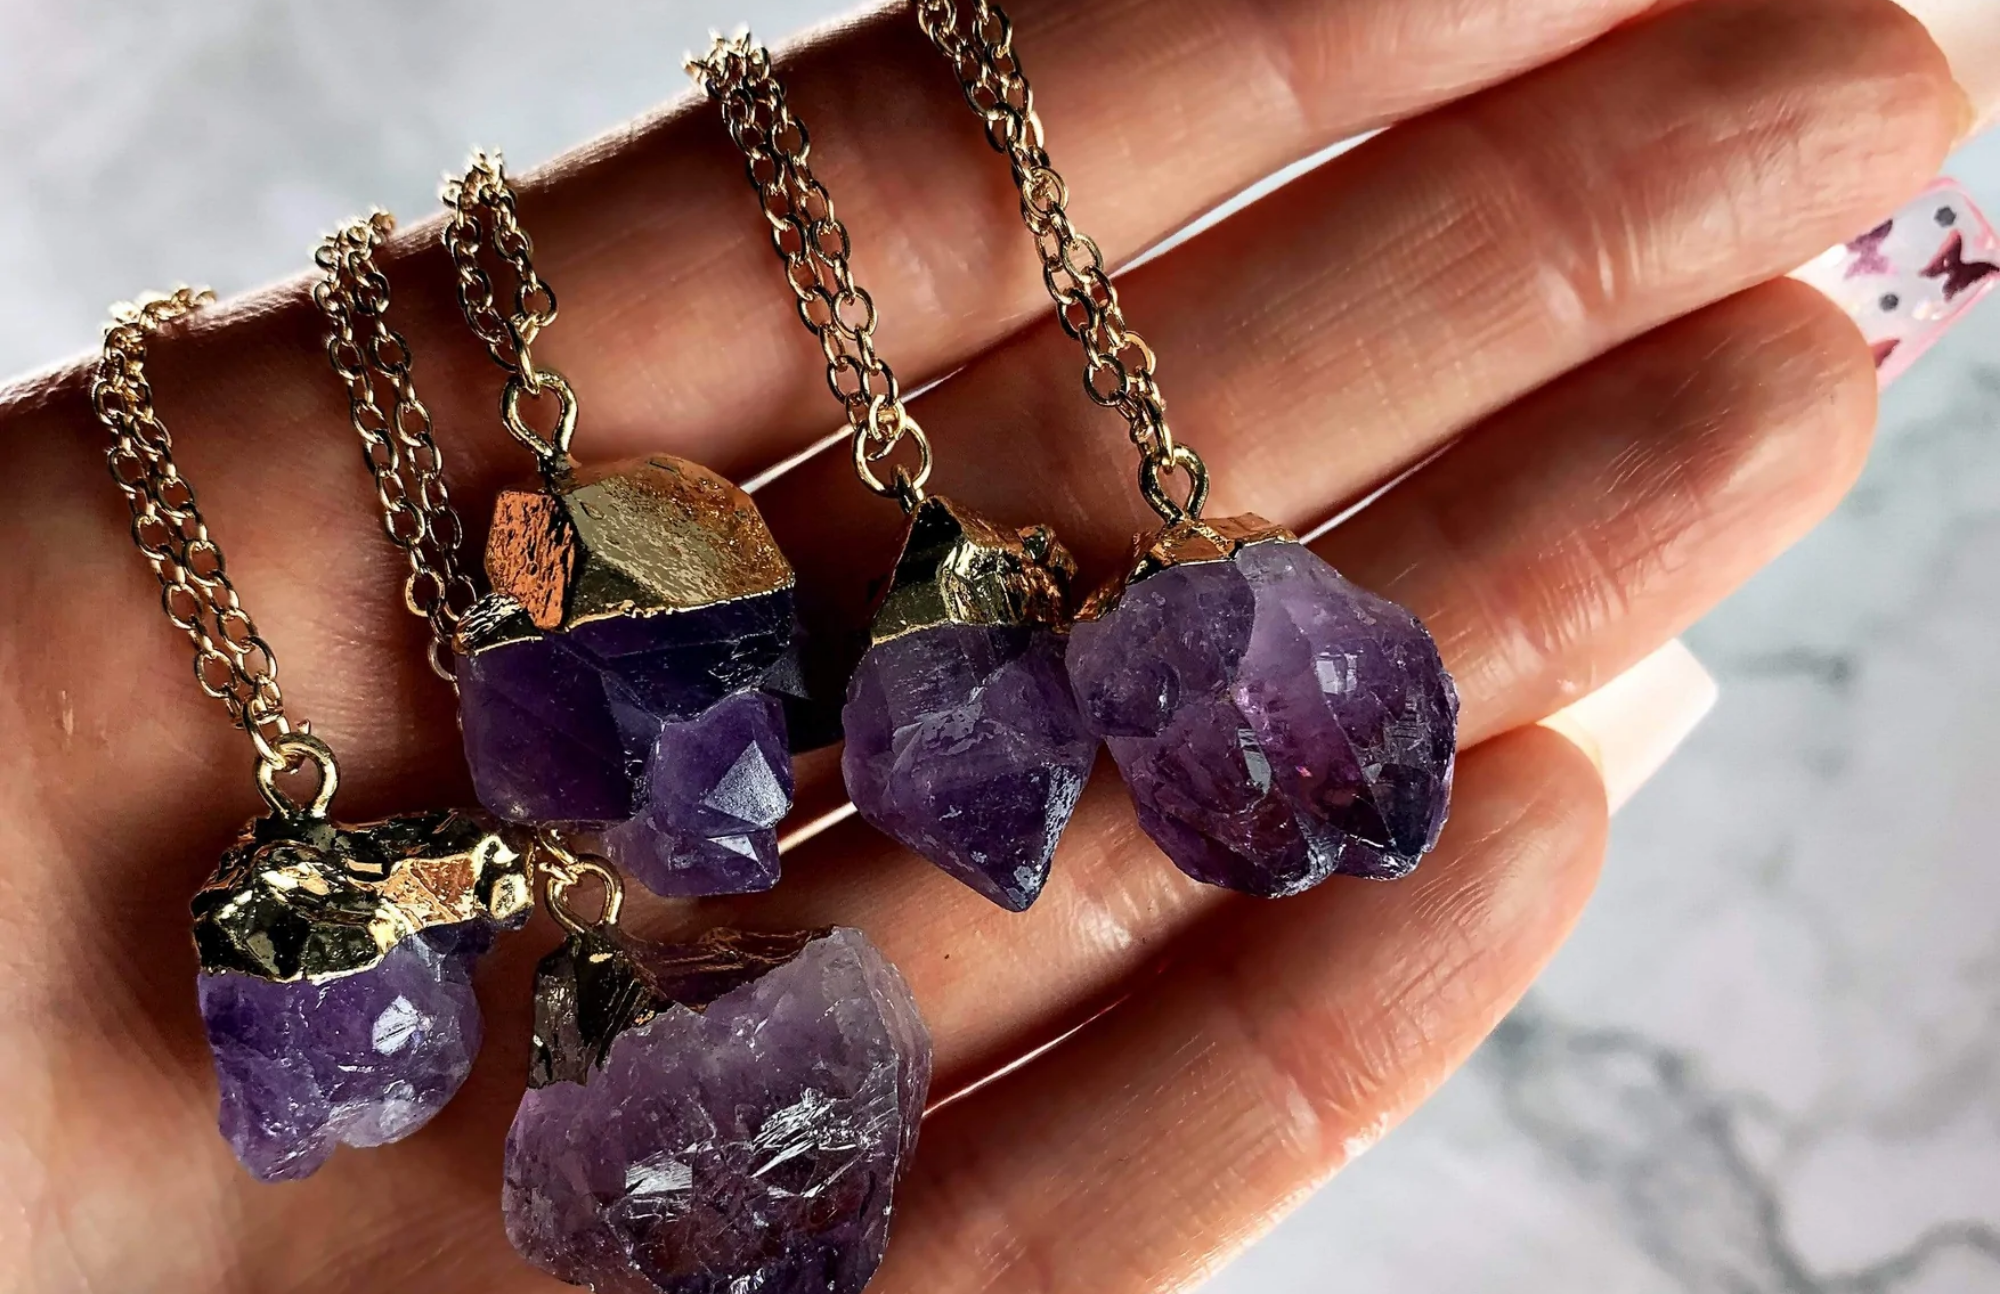 A woman's palm with five amethyst pendants